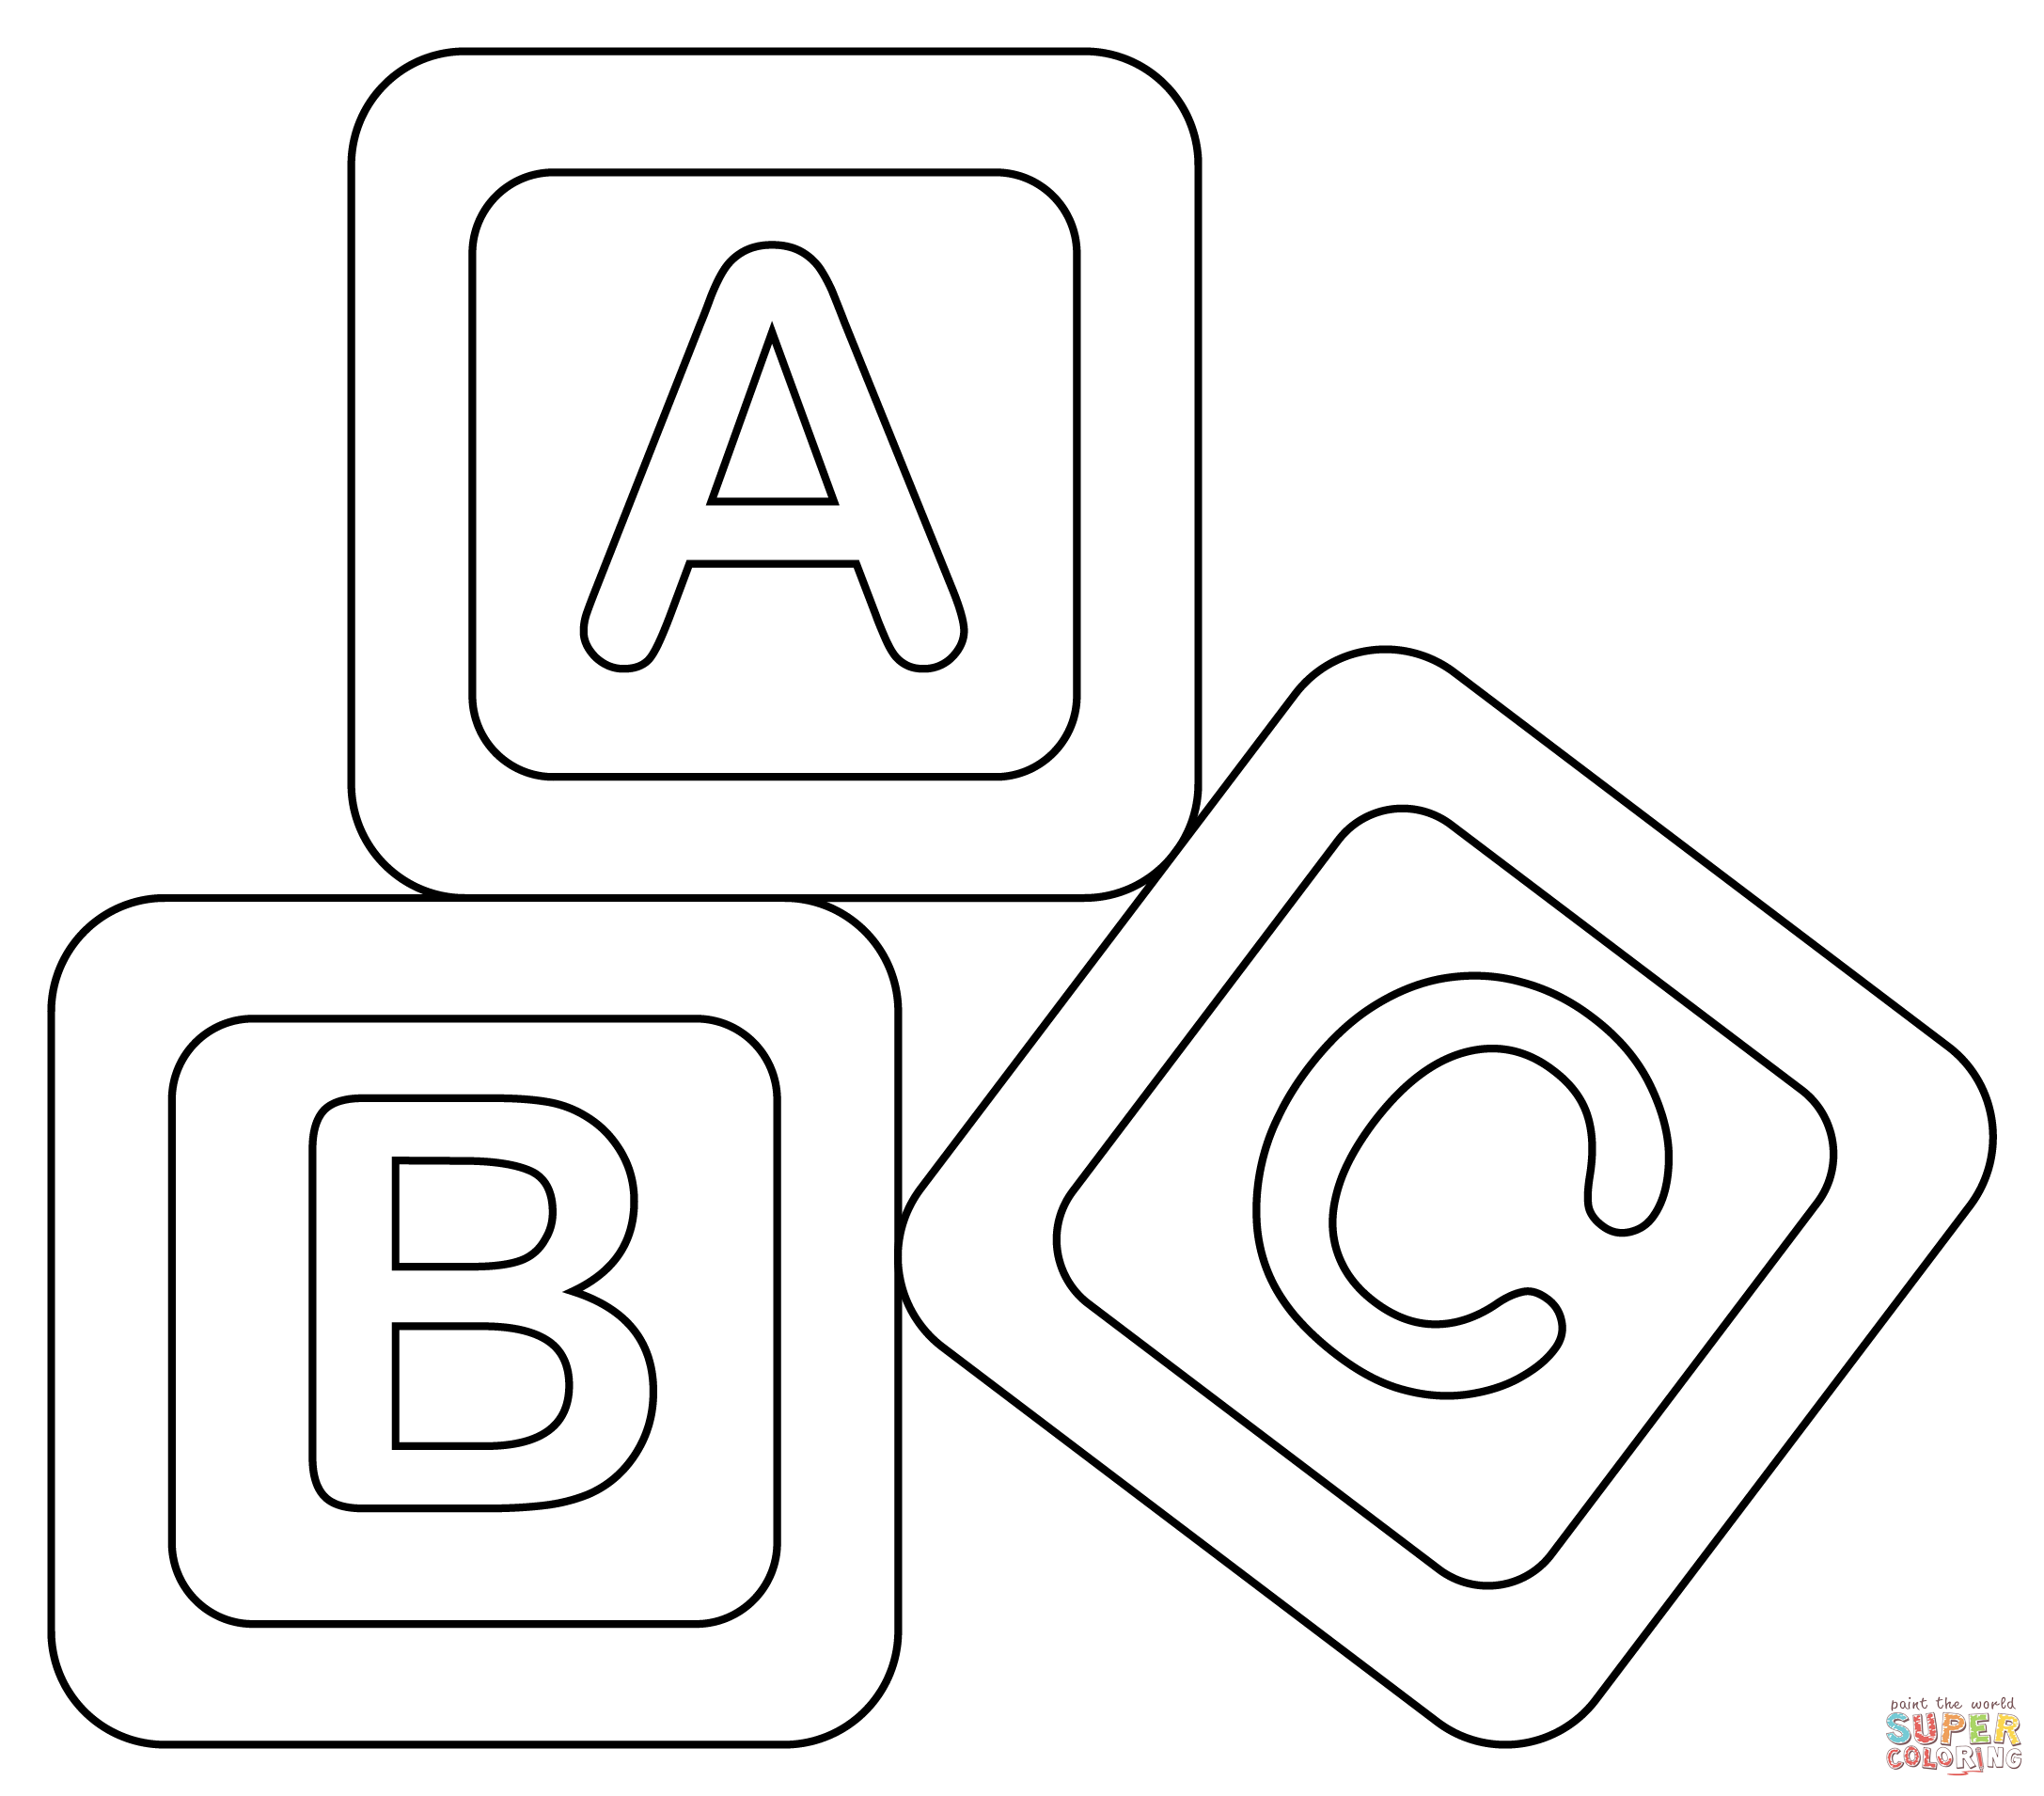 Abc blocks coloring page free printable coloring pages